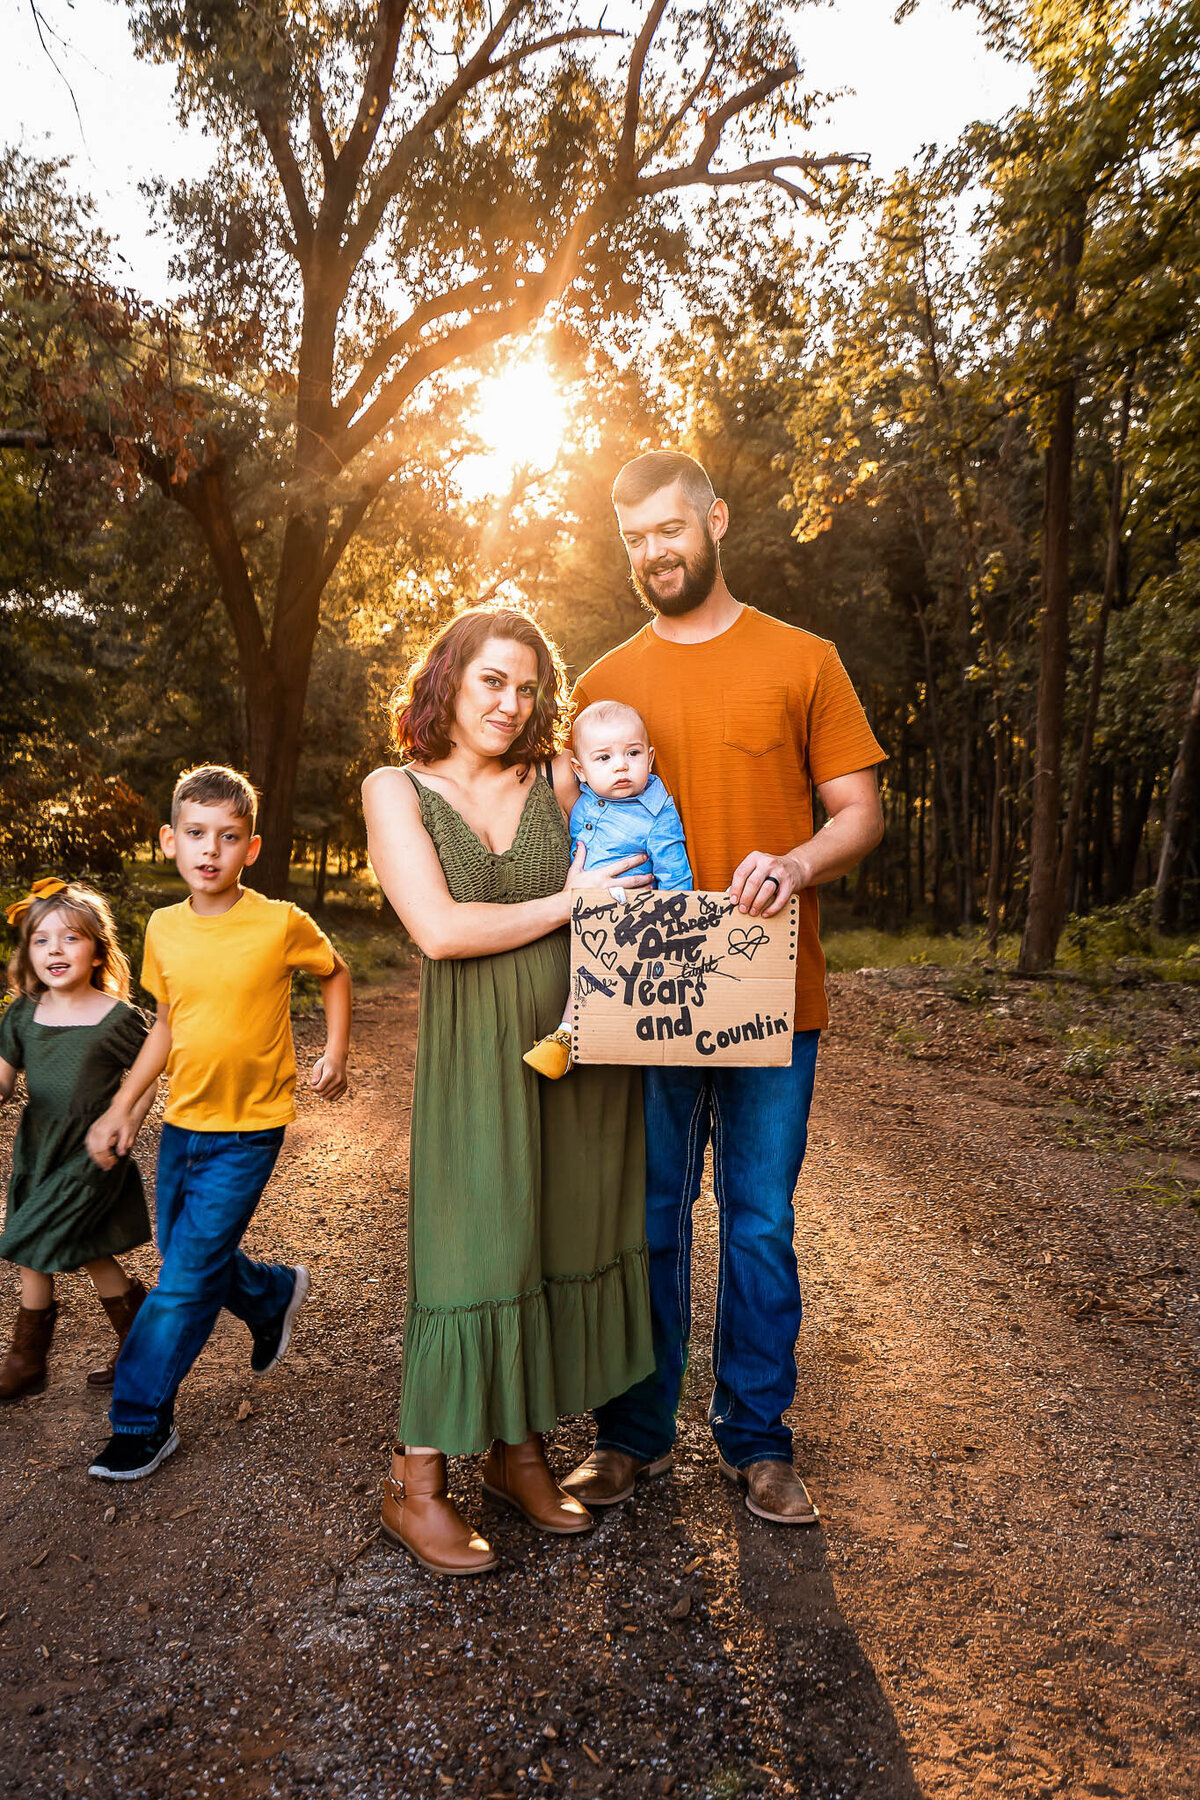 Family of 5 pose for fall photo session at sunset on a dirt road wearing bold colors